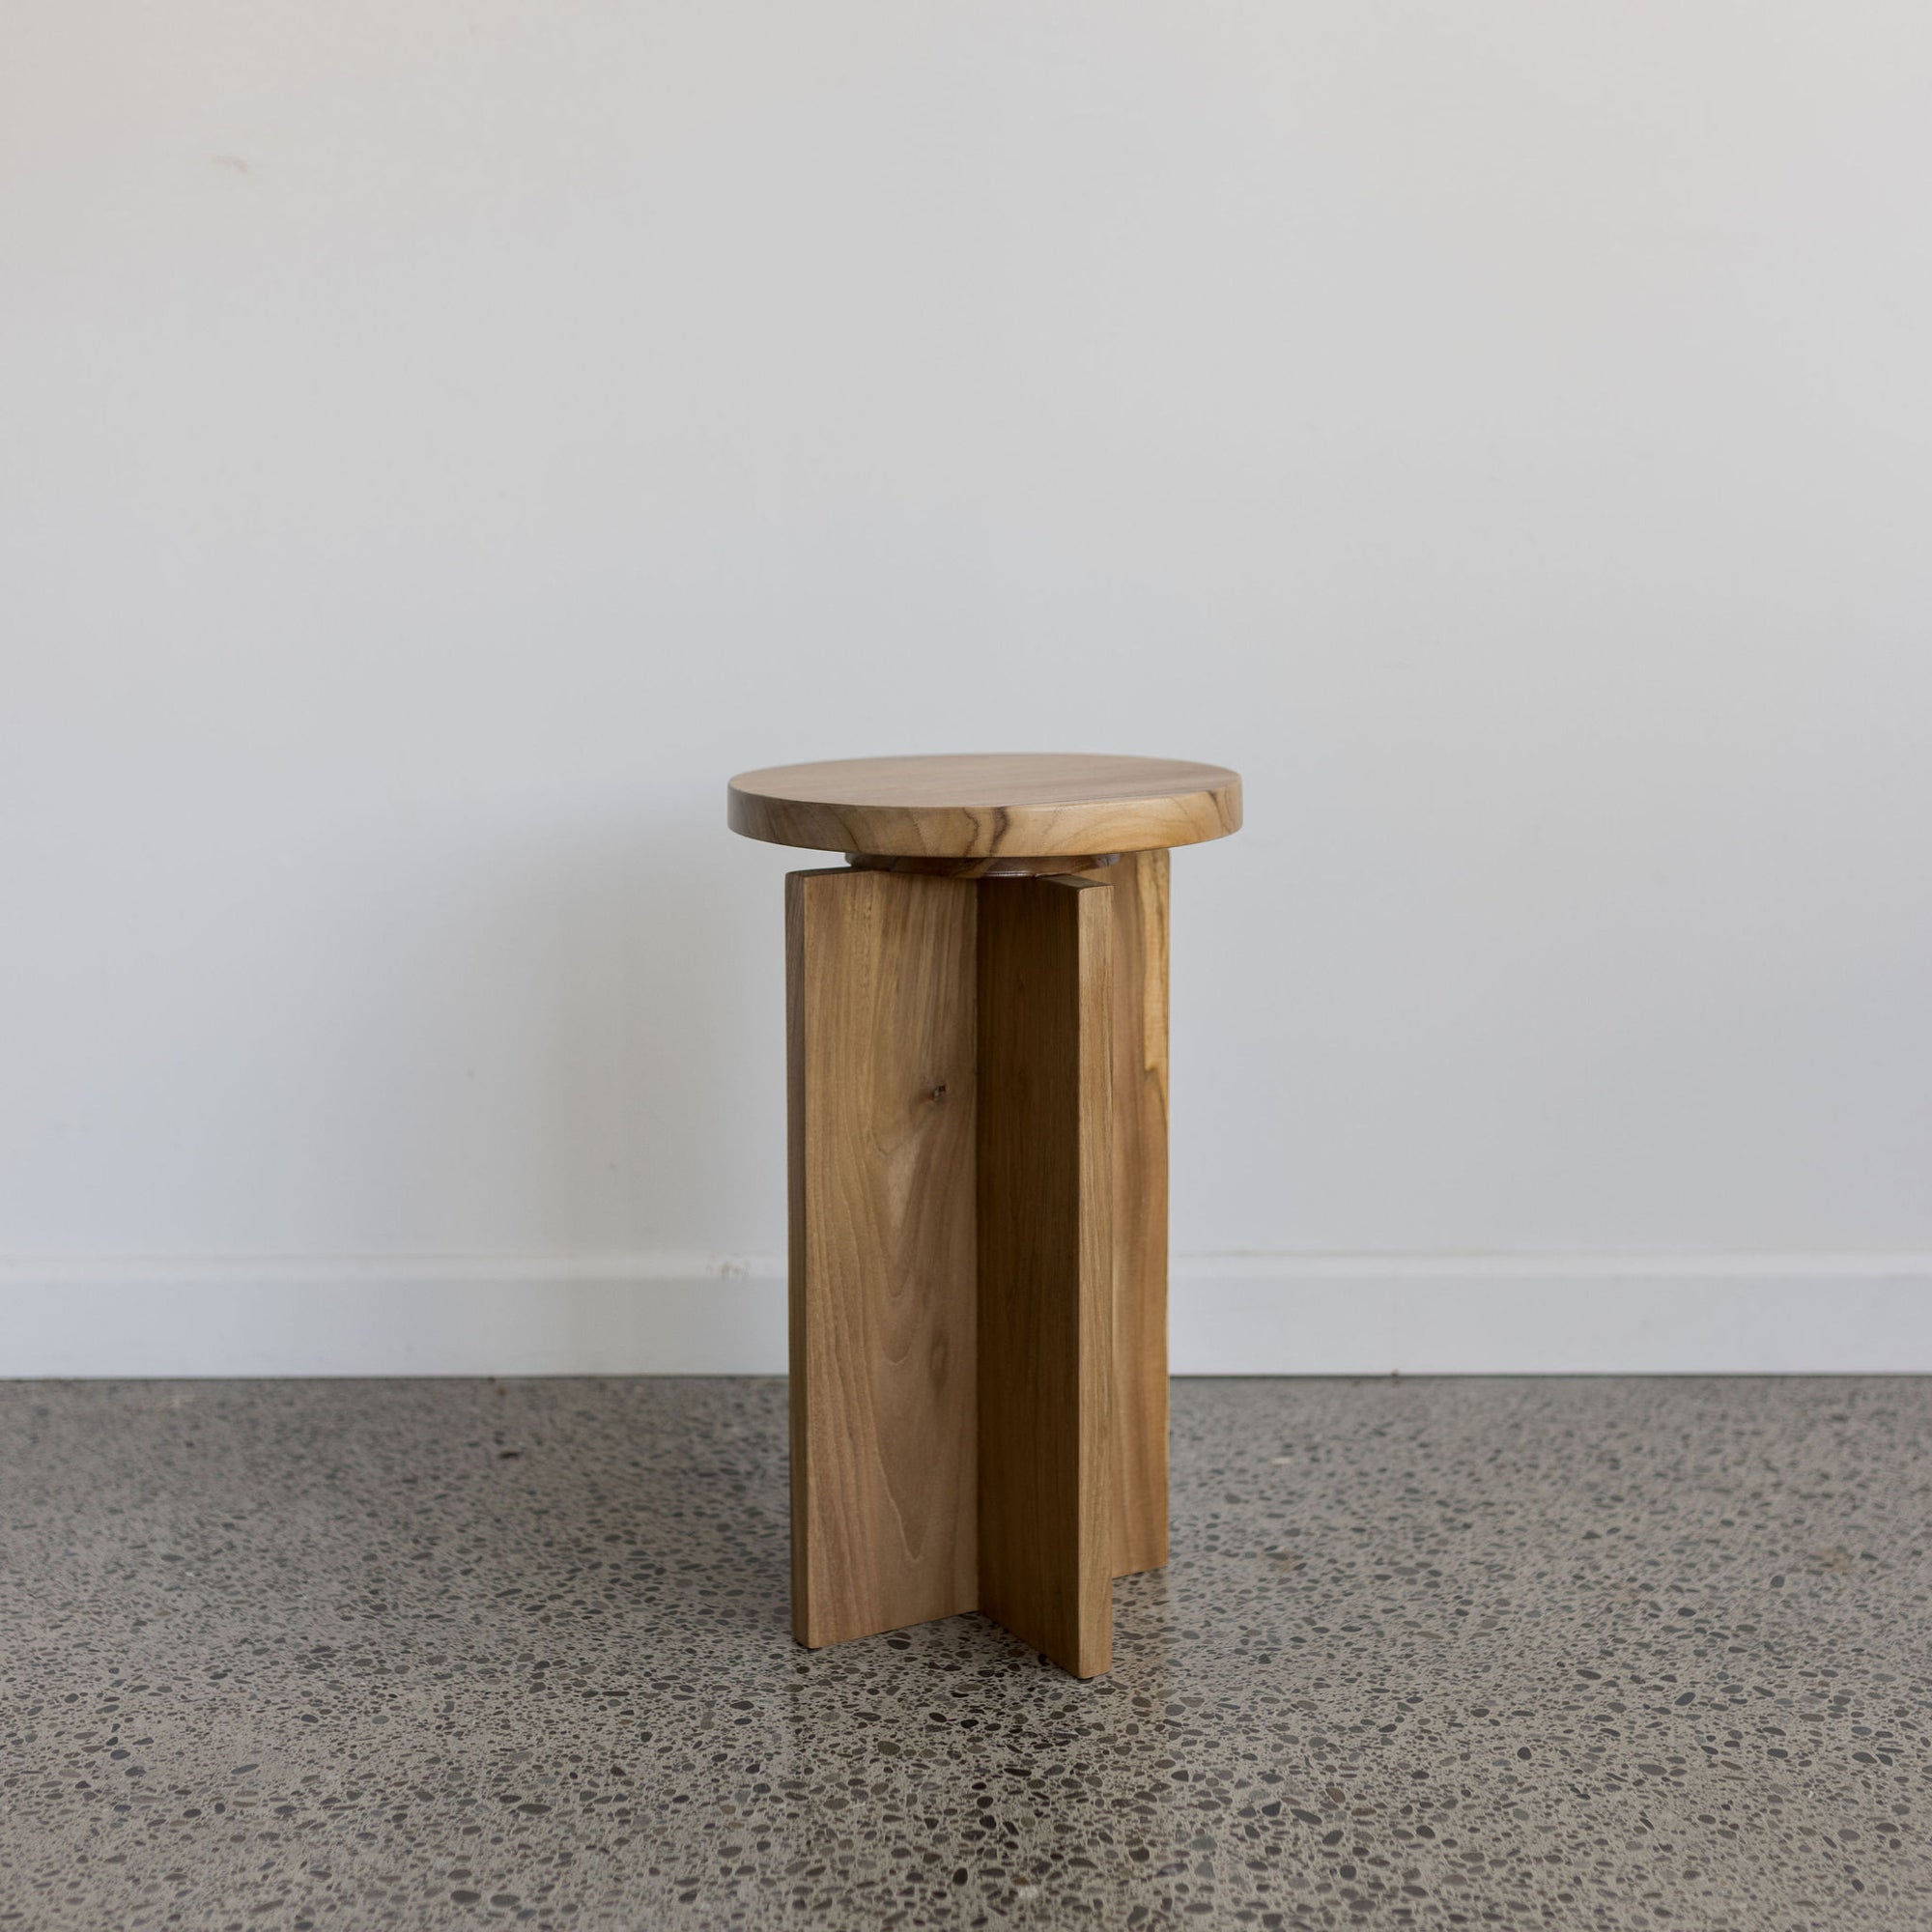 pillar side table with round top by corcovado furniture online in new zealand a teak wood accent table 